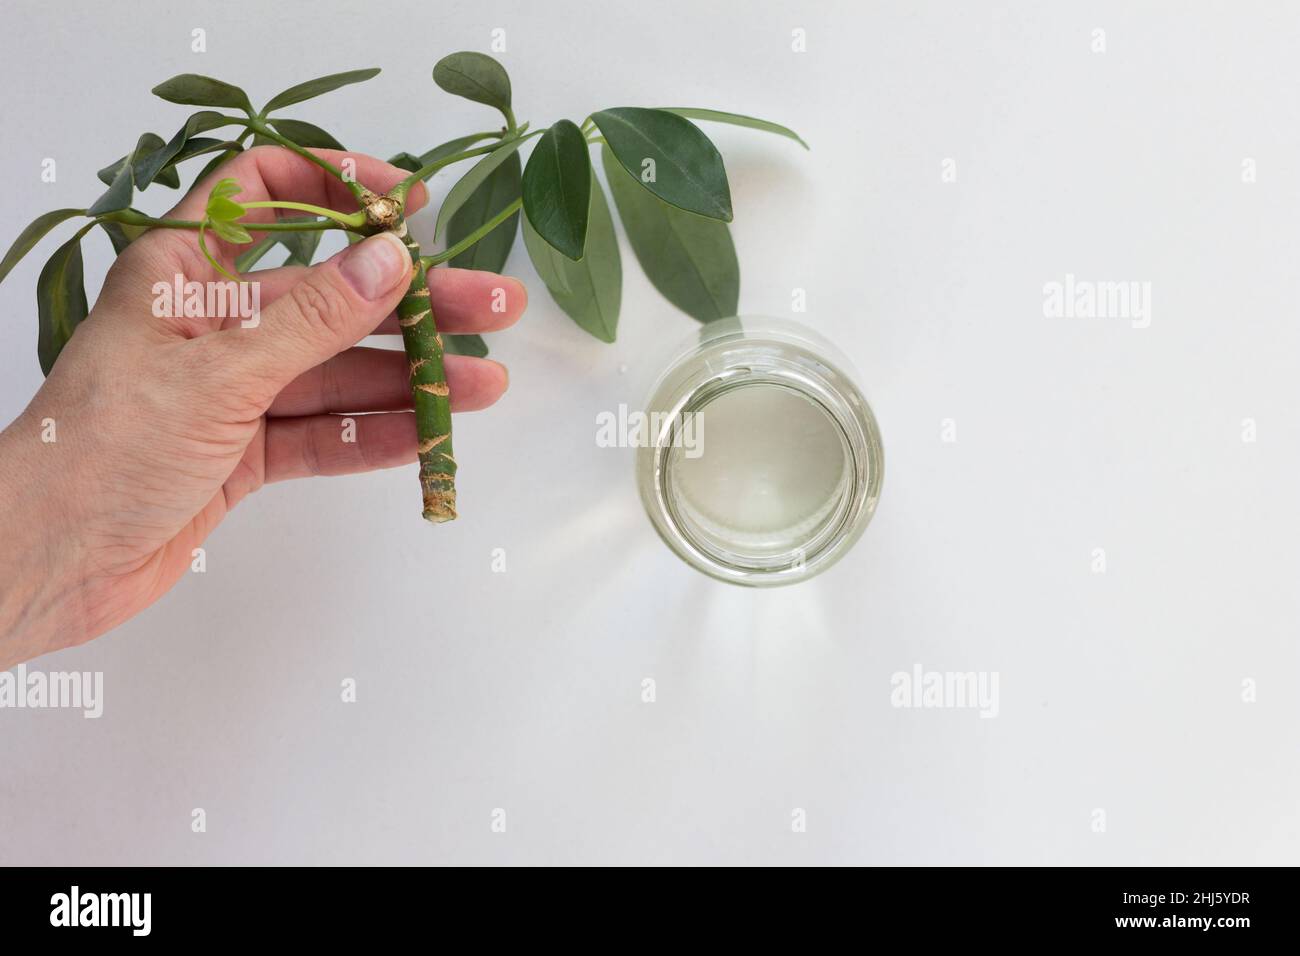 Woman hand holding cutting of Schefflera arboricola or dwarf umbrella tree named and water in bottle to put it into for rooting on white background Stock Photo